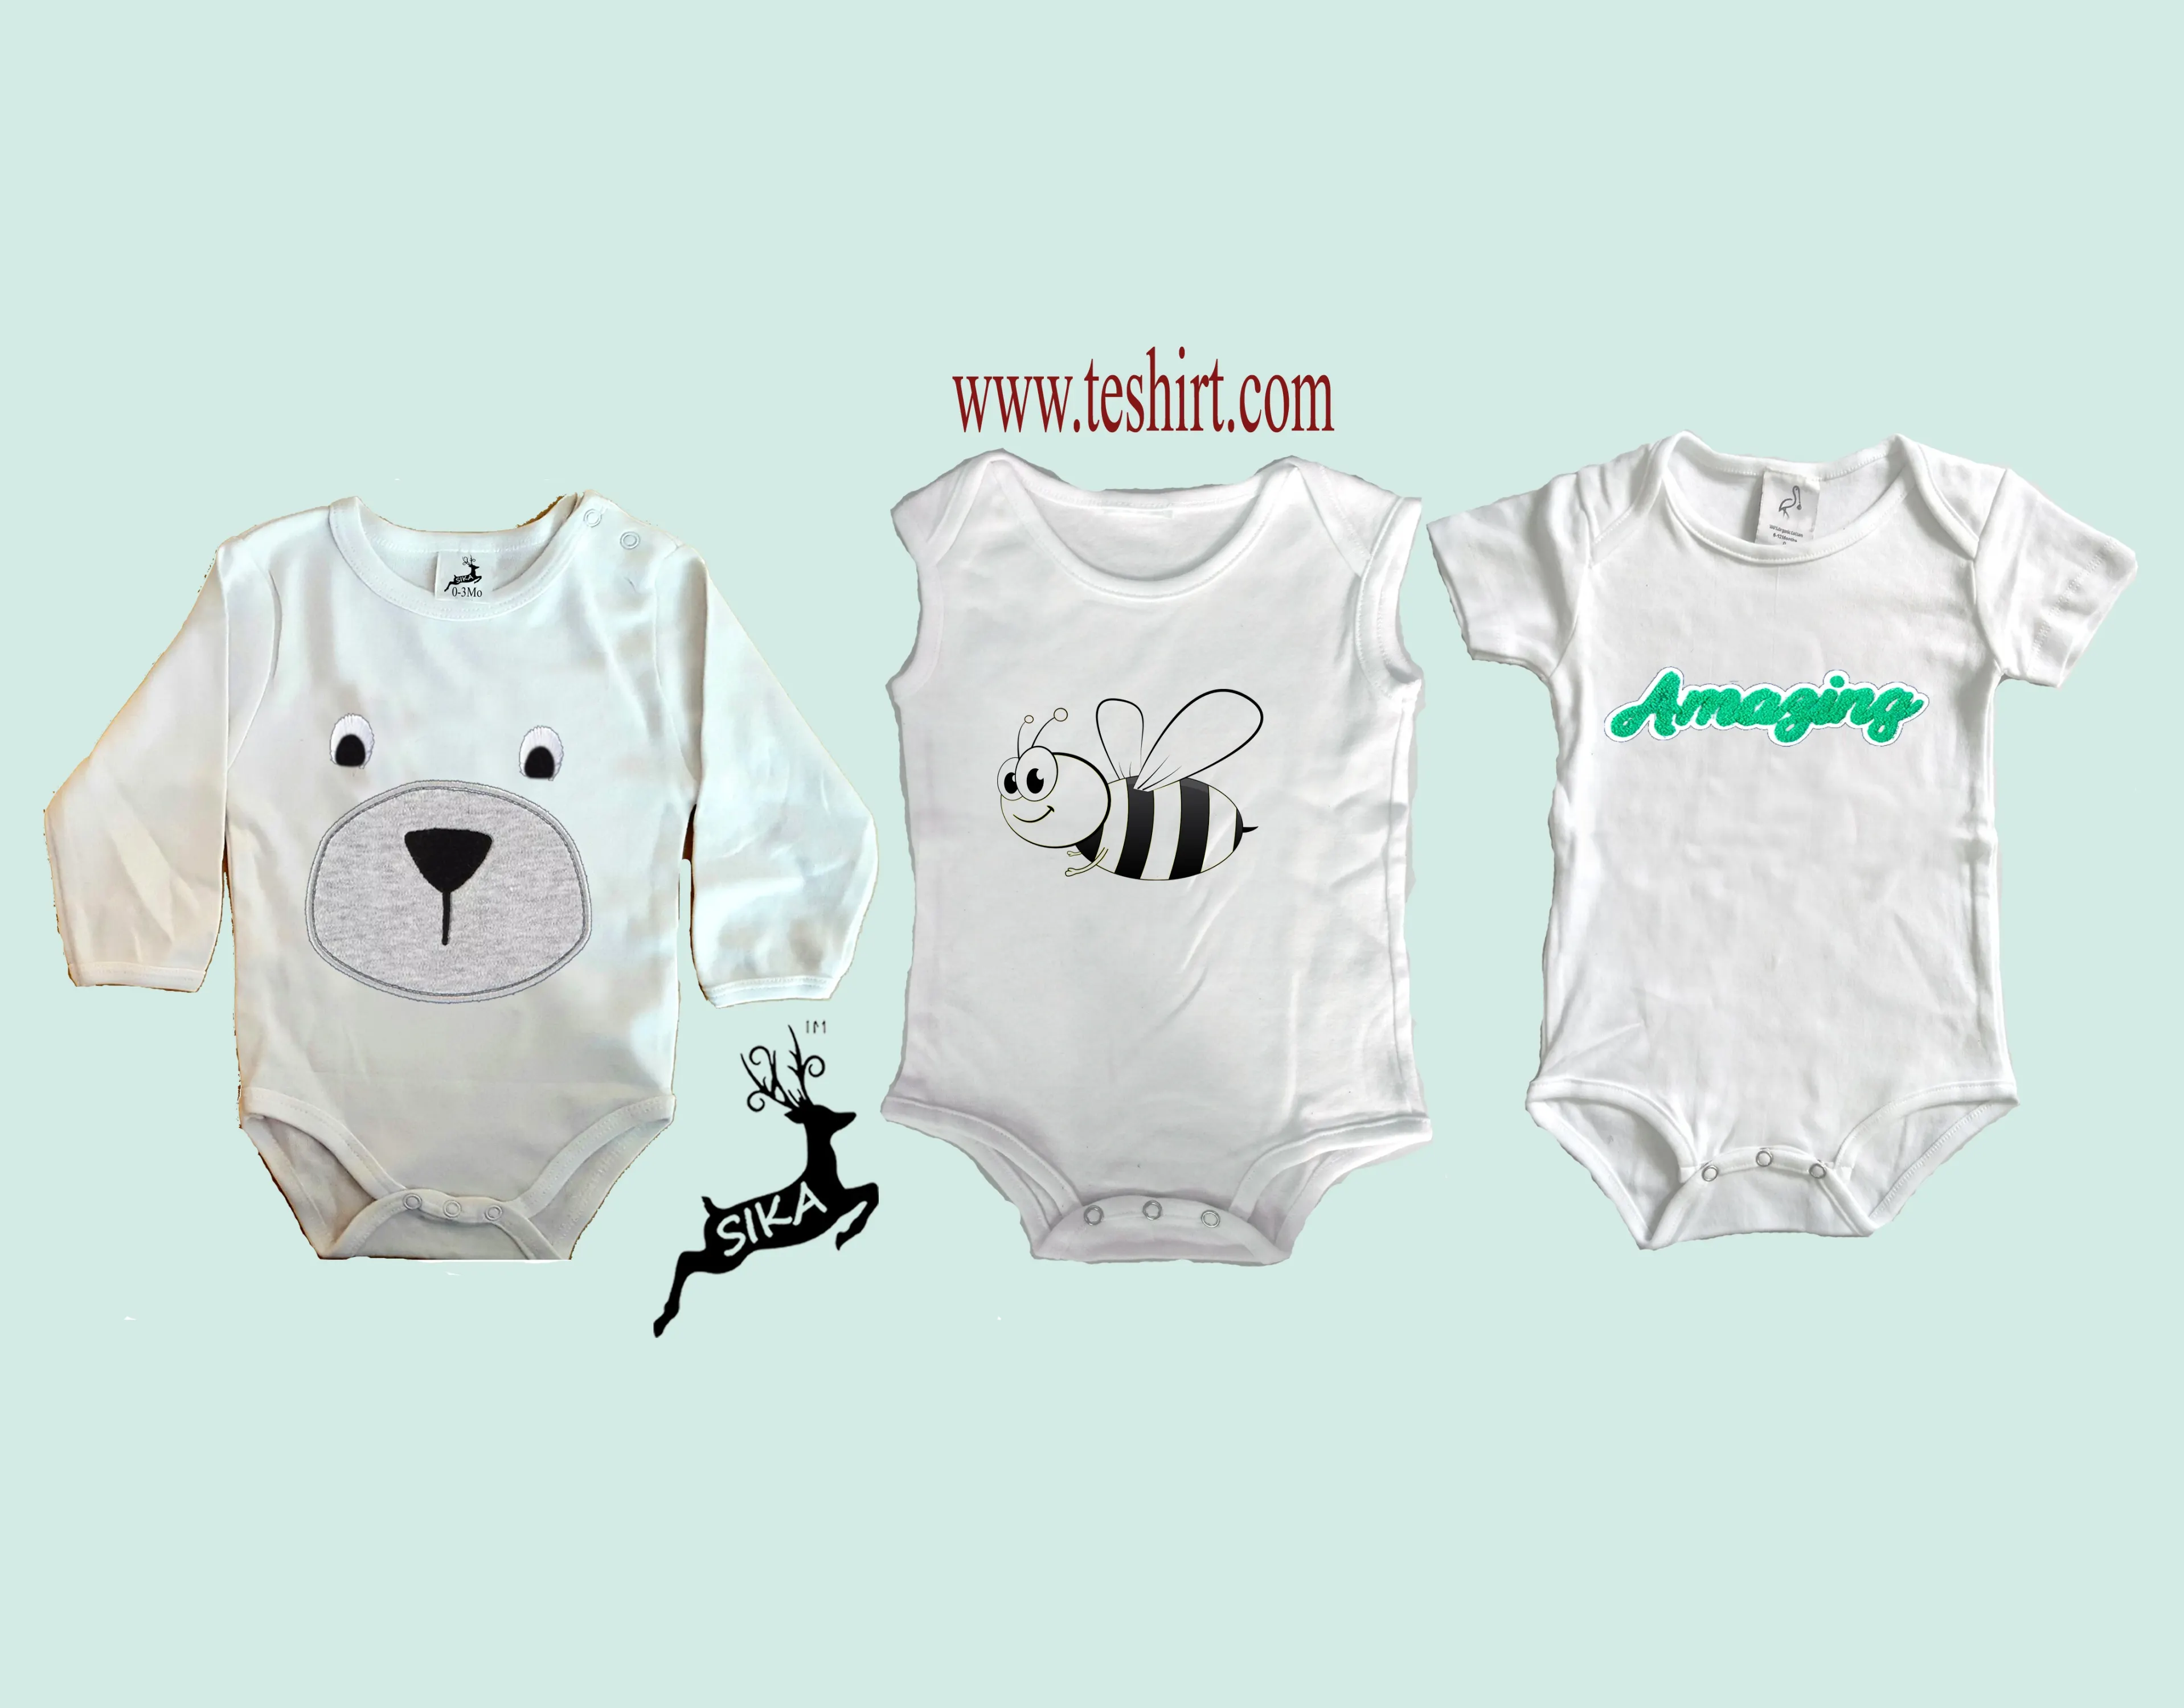 2019 beautiful eco friendly substantia baby onesie/ropa de bebes/ baby romper Kid boutique clothing organic bamboo cotton romper